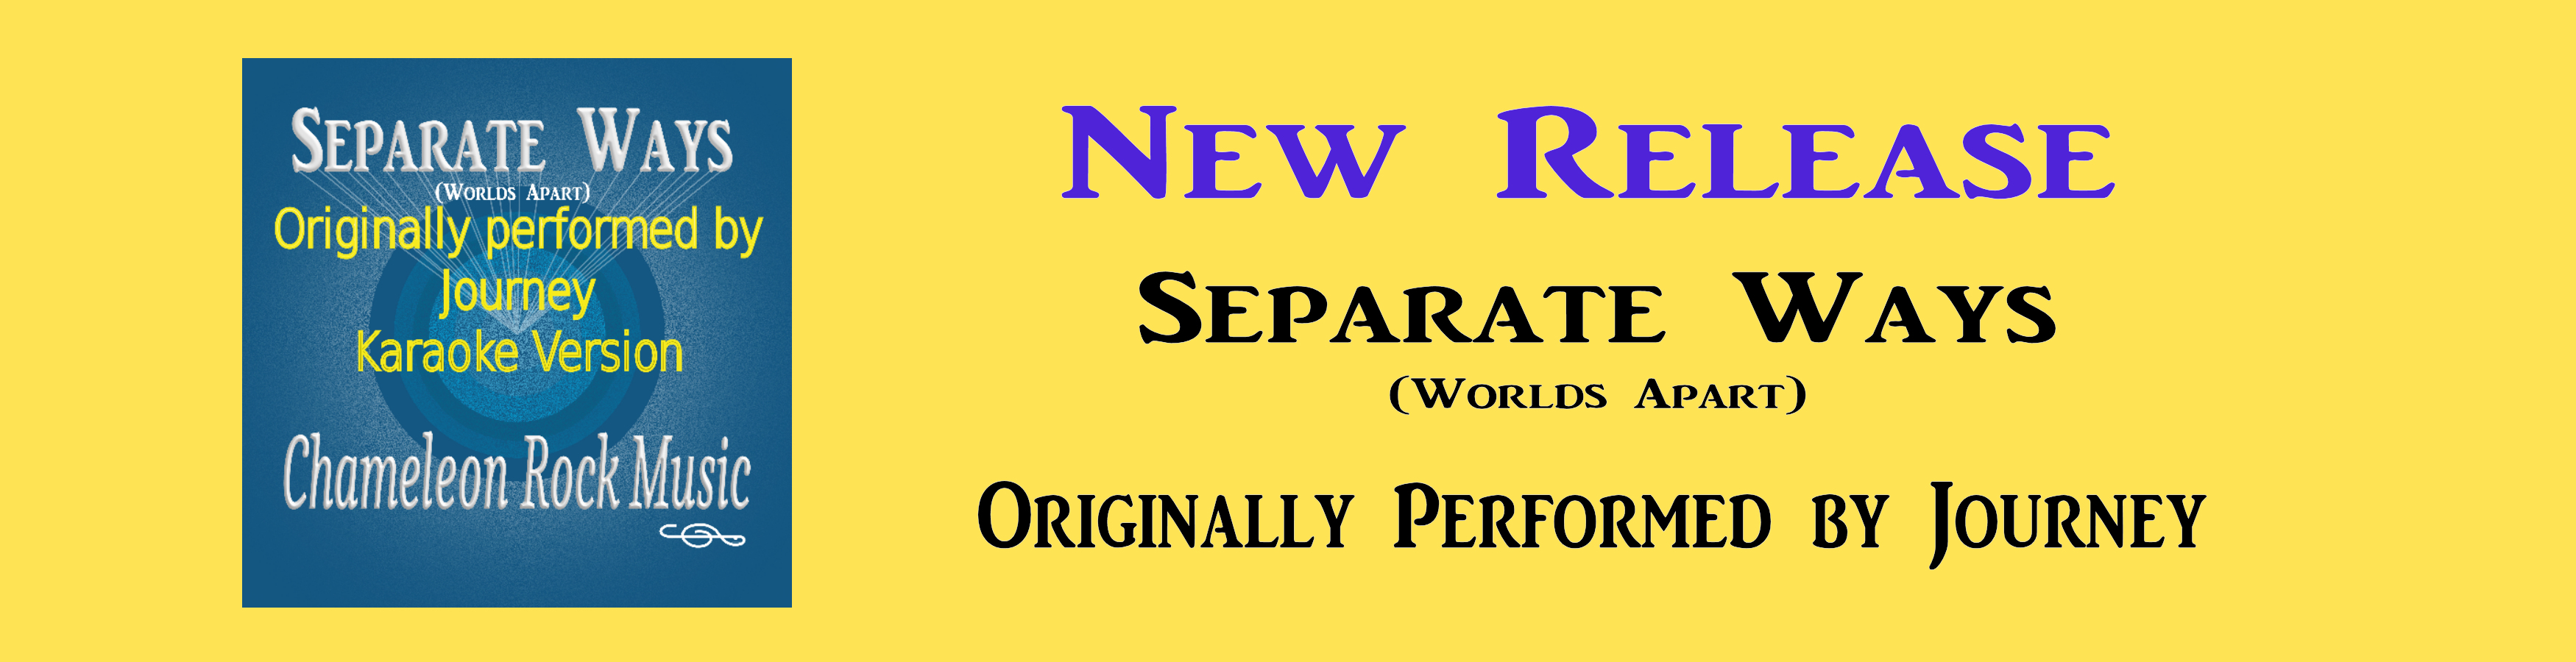 New Release : Separate Ways